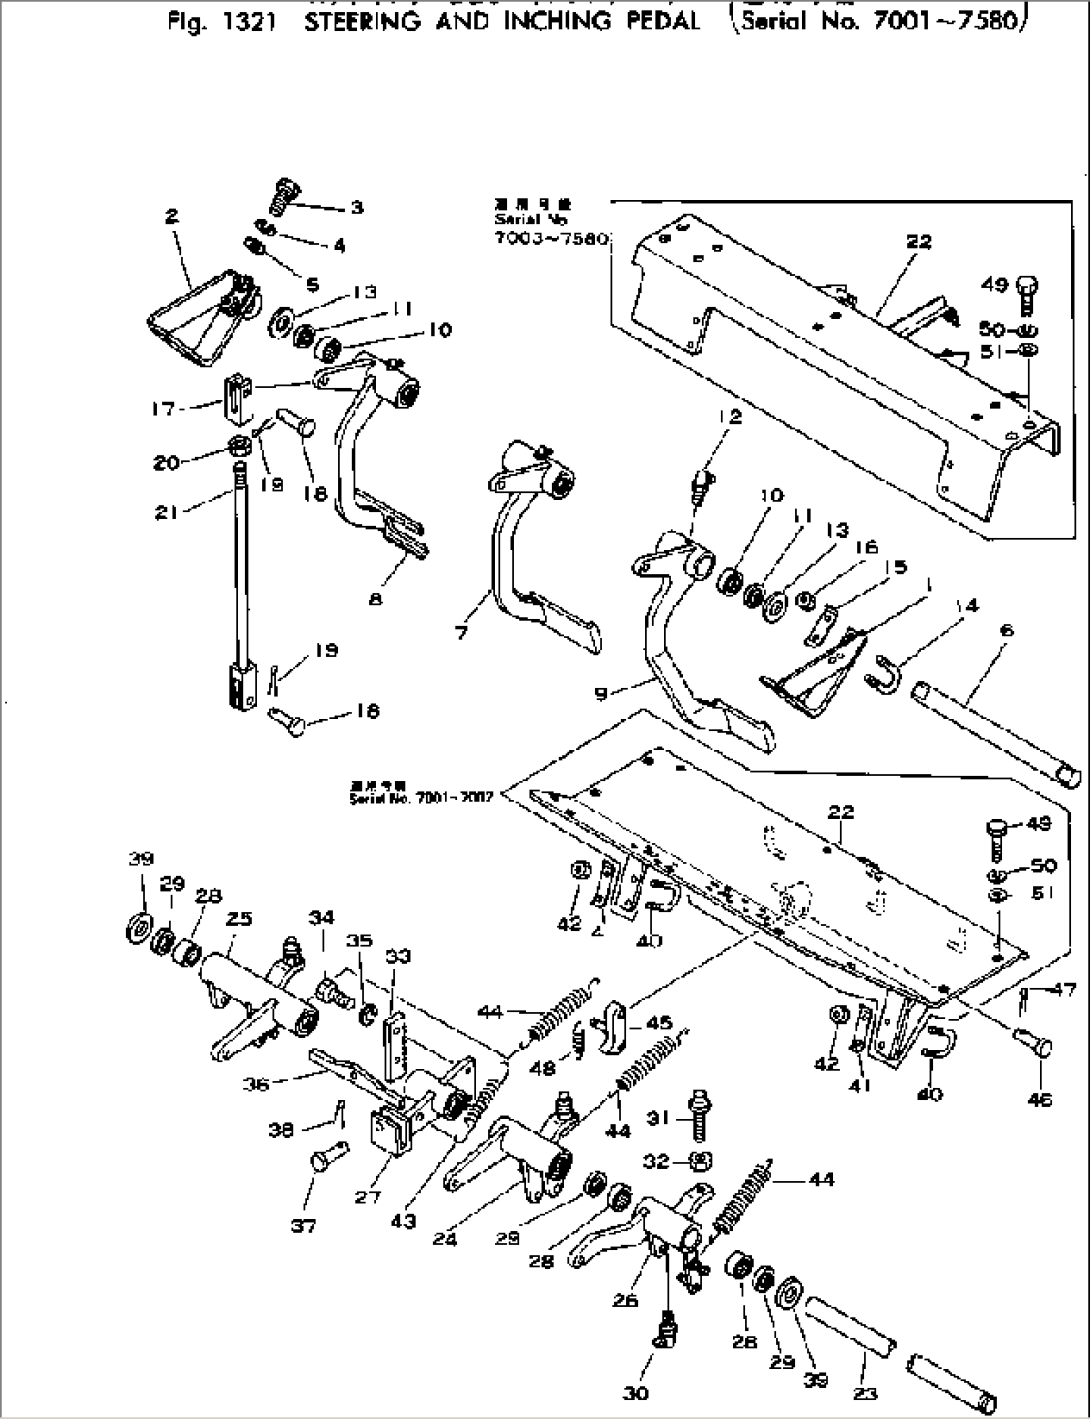 STEERING AND INCHING PEDAL(#7001-7580)